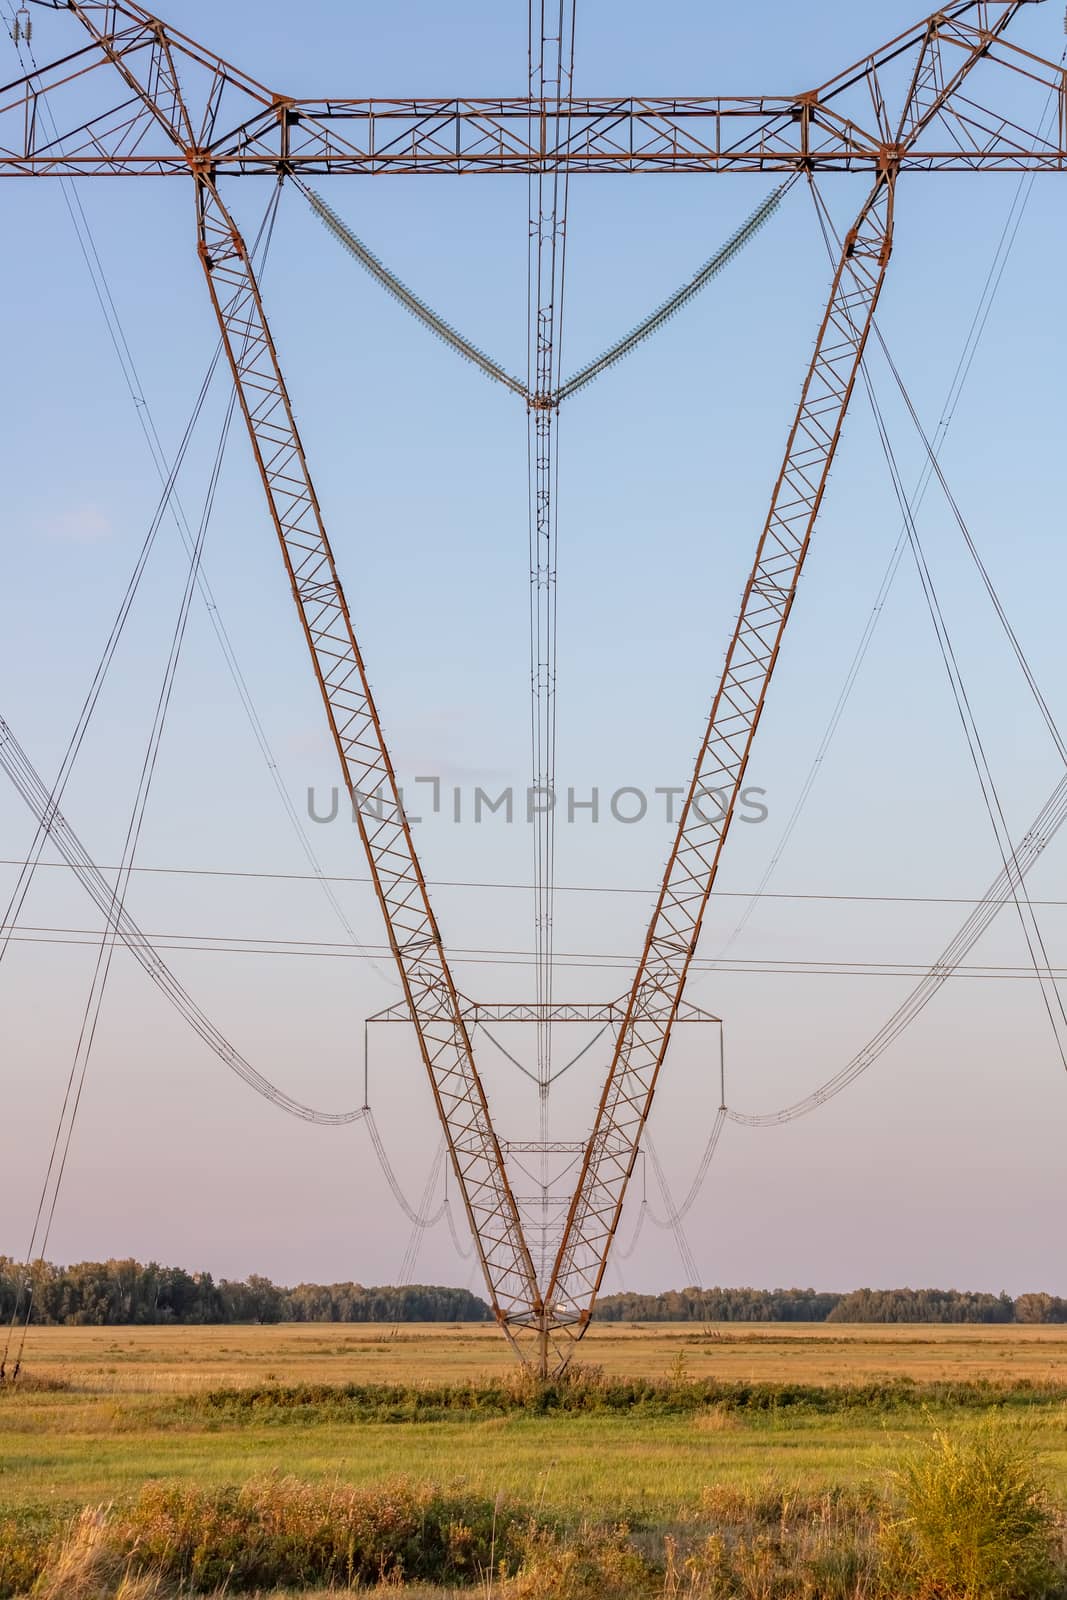 Low angle view of high voltage power lines and poles in the countryside. Blue sky as a background. Portrait format.